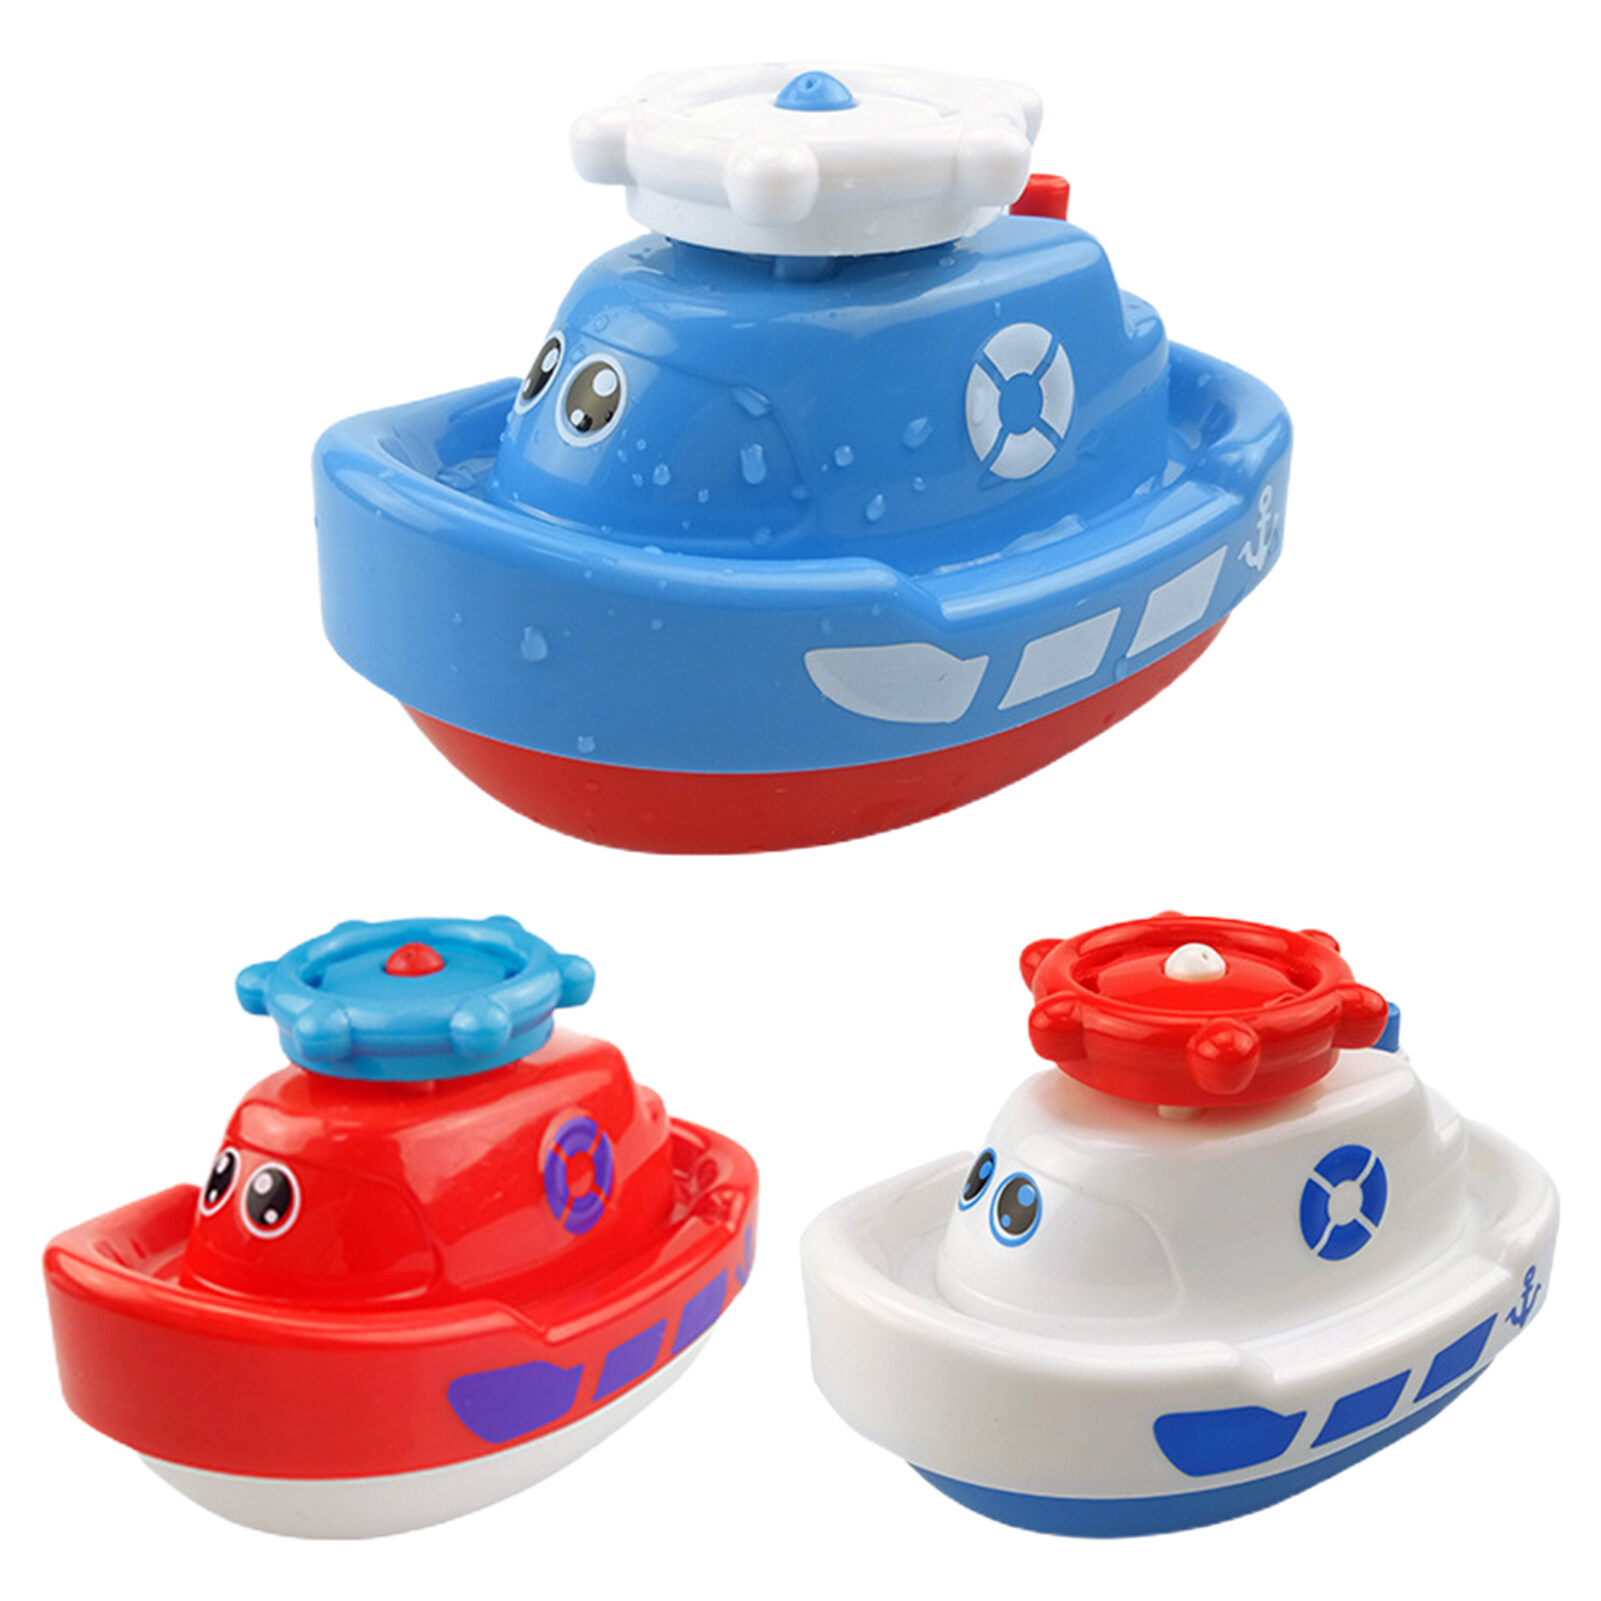 UHH Water Toy Lovely Interactive Smooth Surface Adorable Reusable